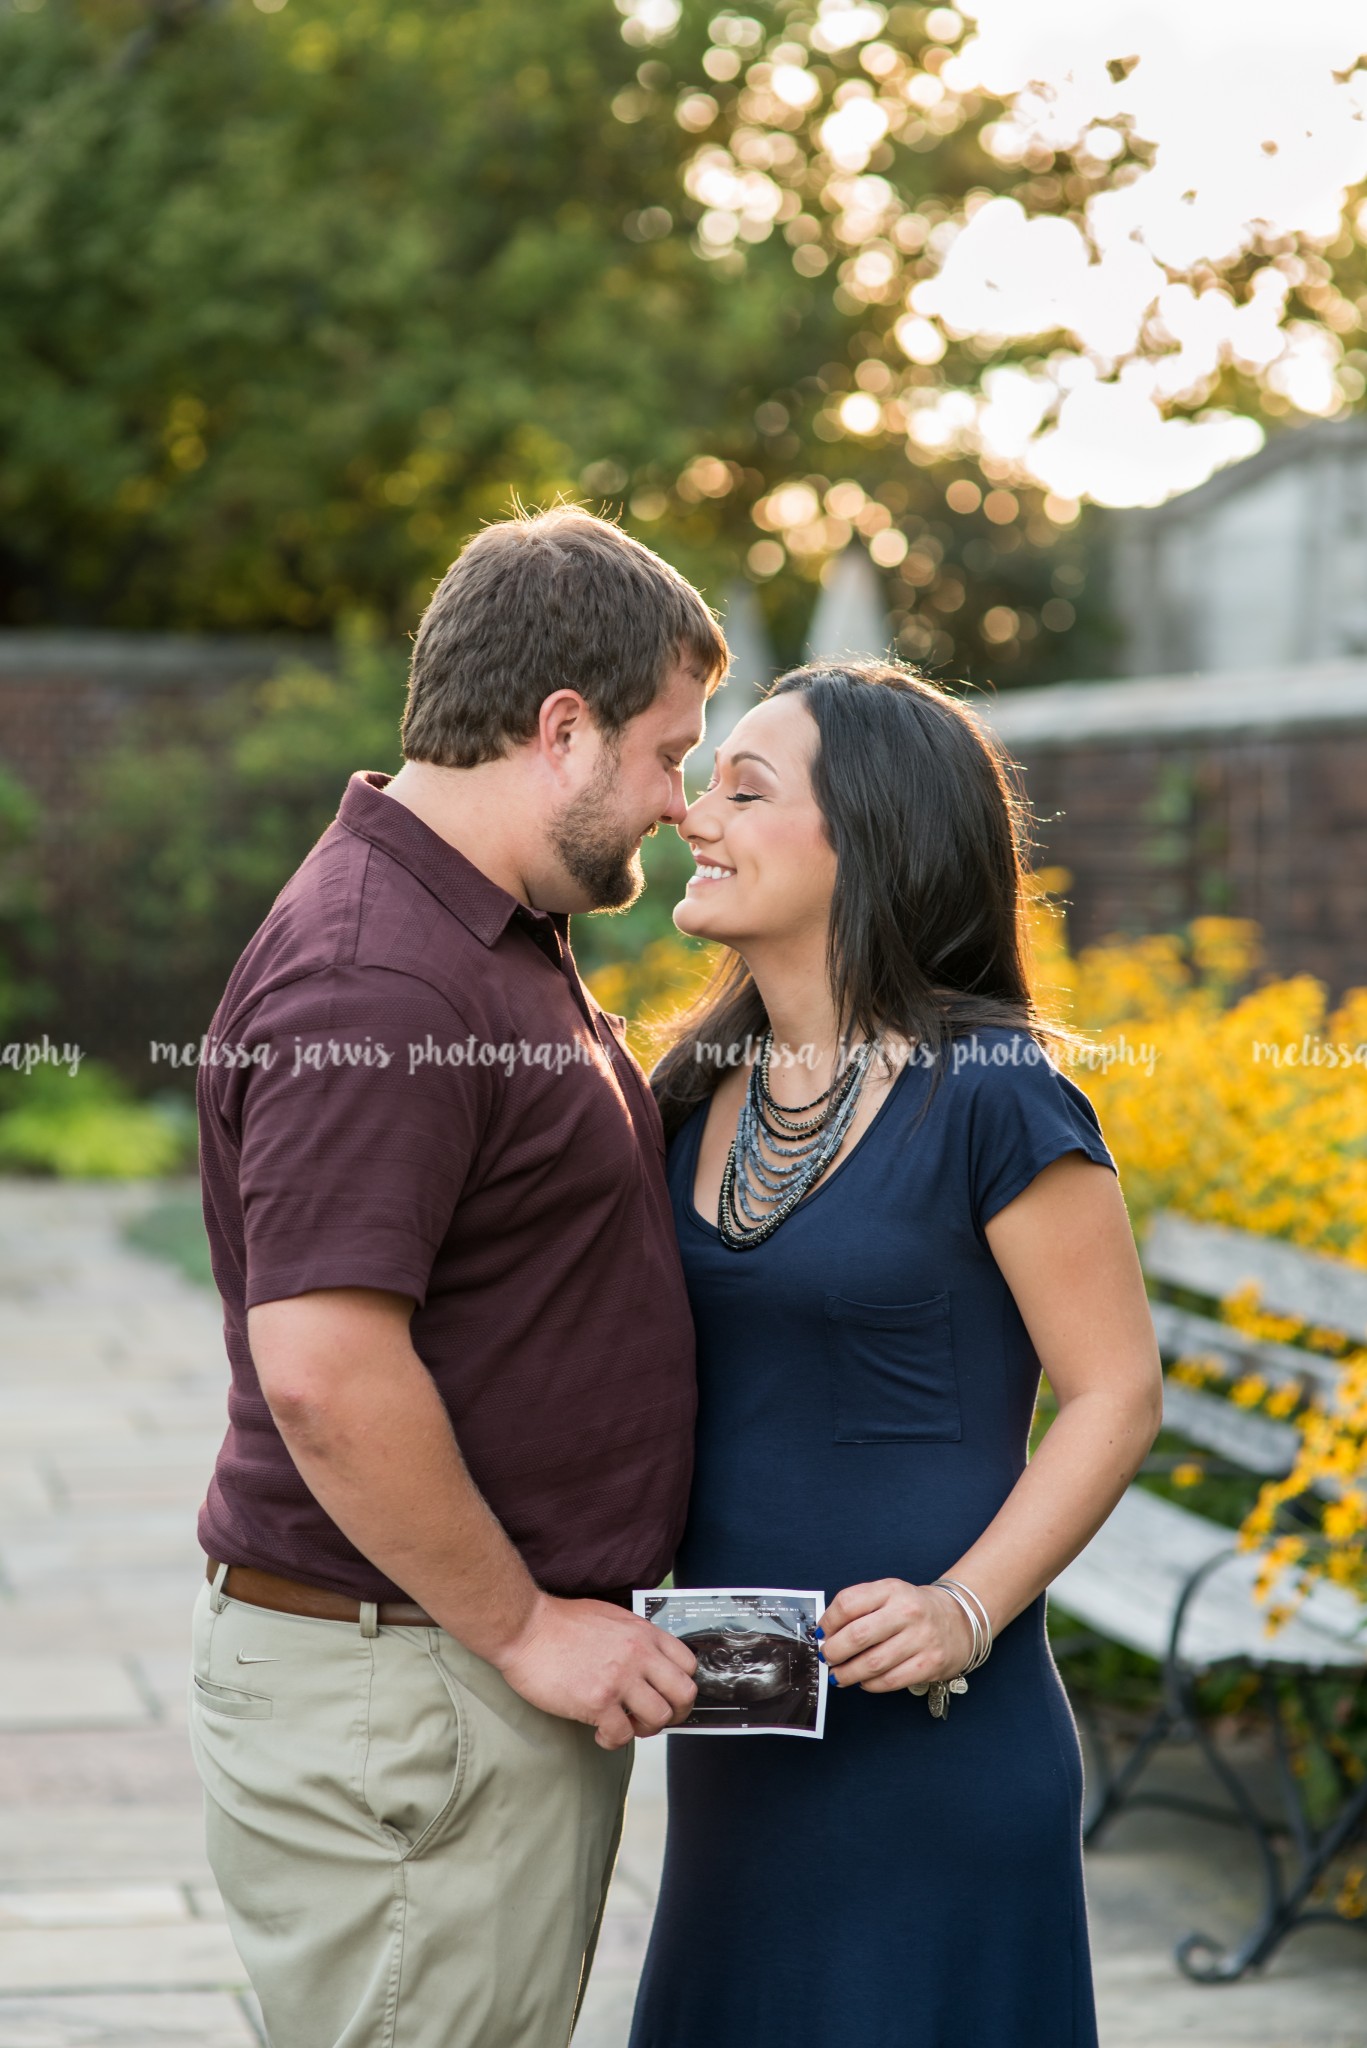 A Pregnancy Announcement! |Cranberry Twp Family Photographer| Wexford Child Photography